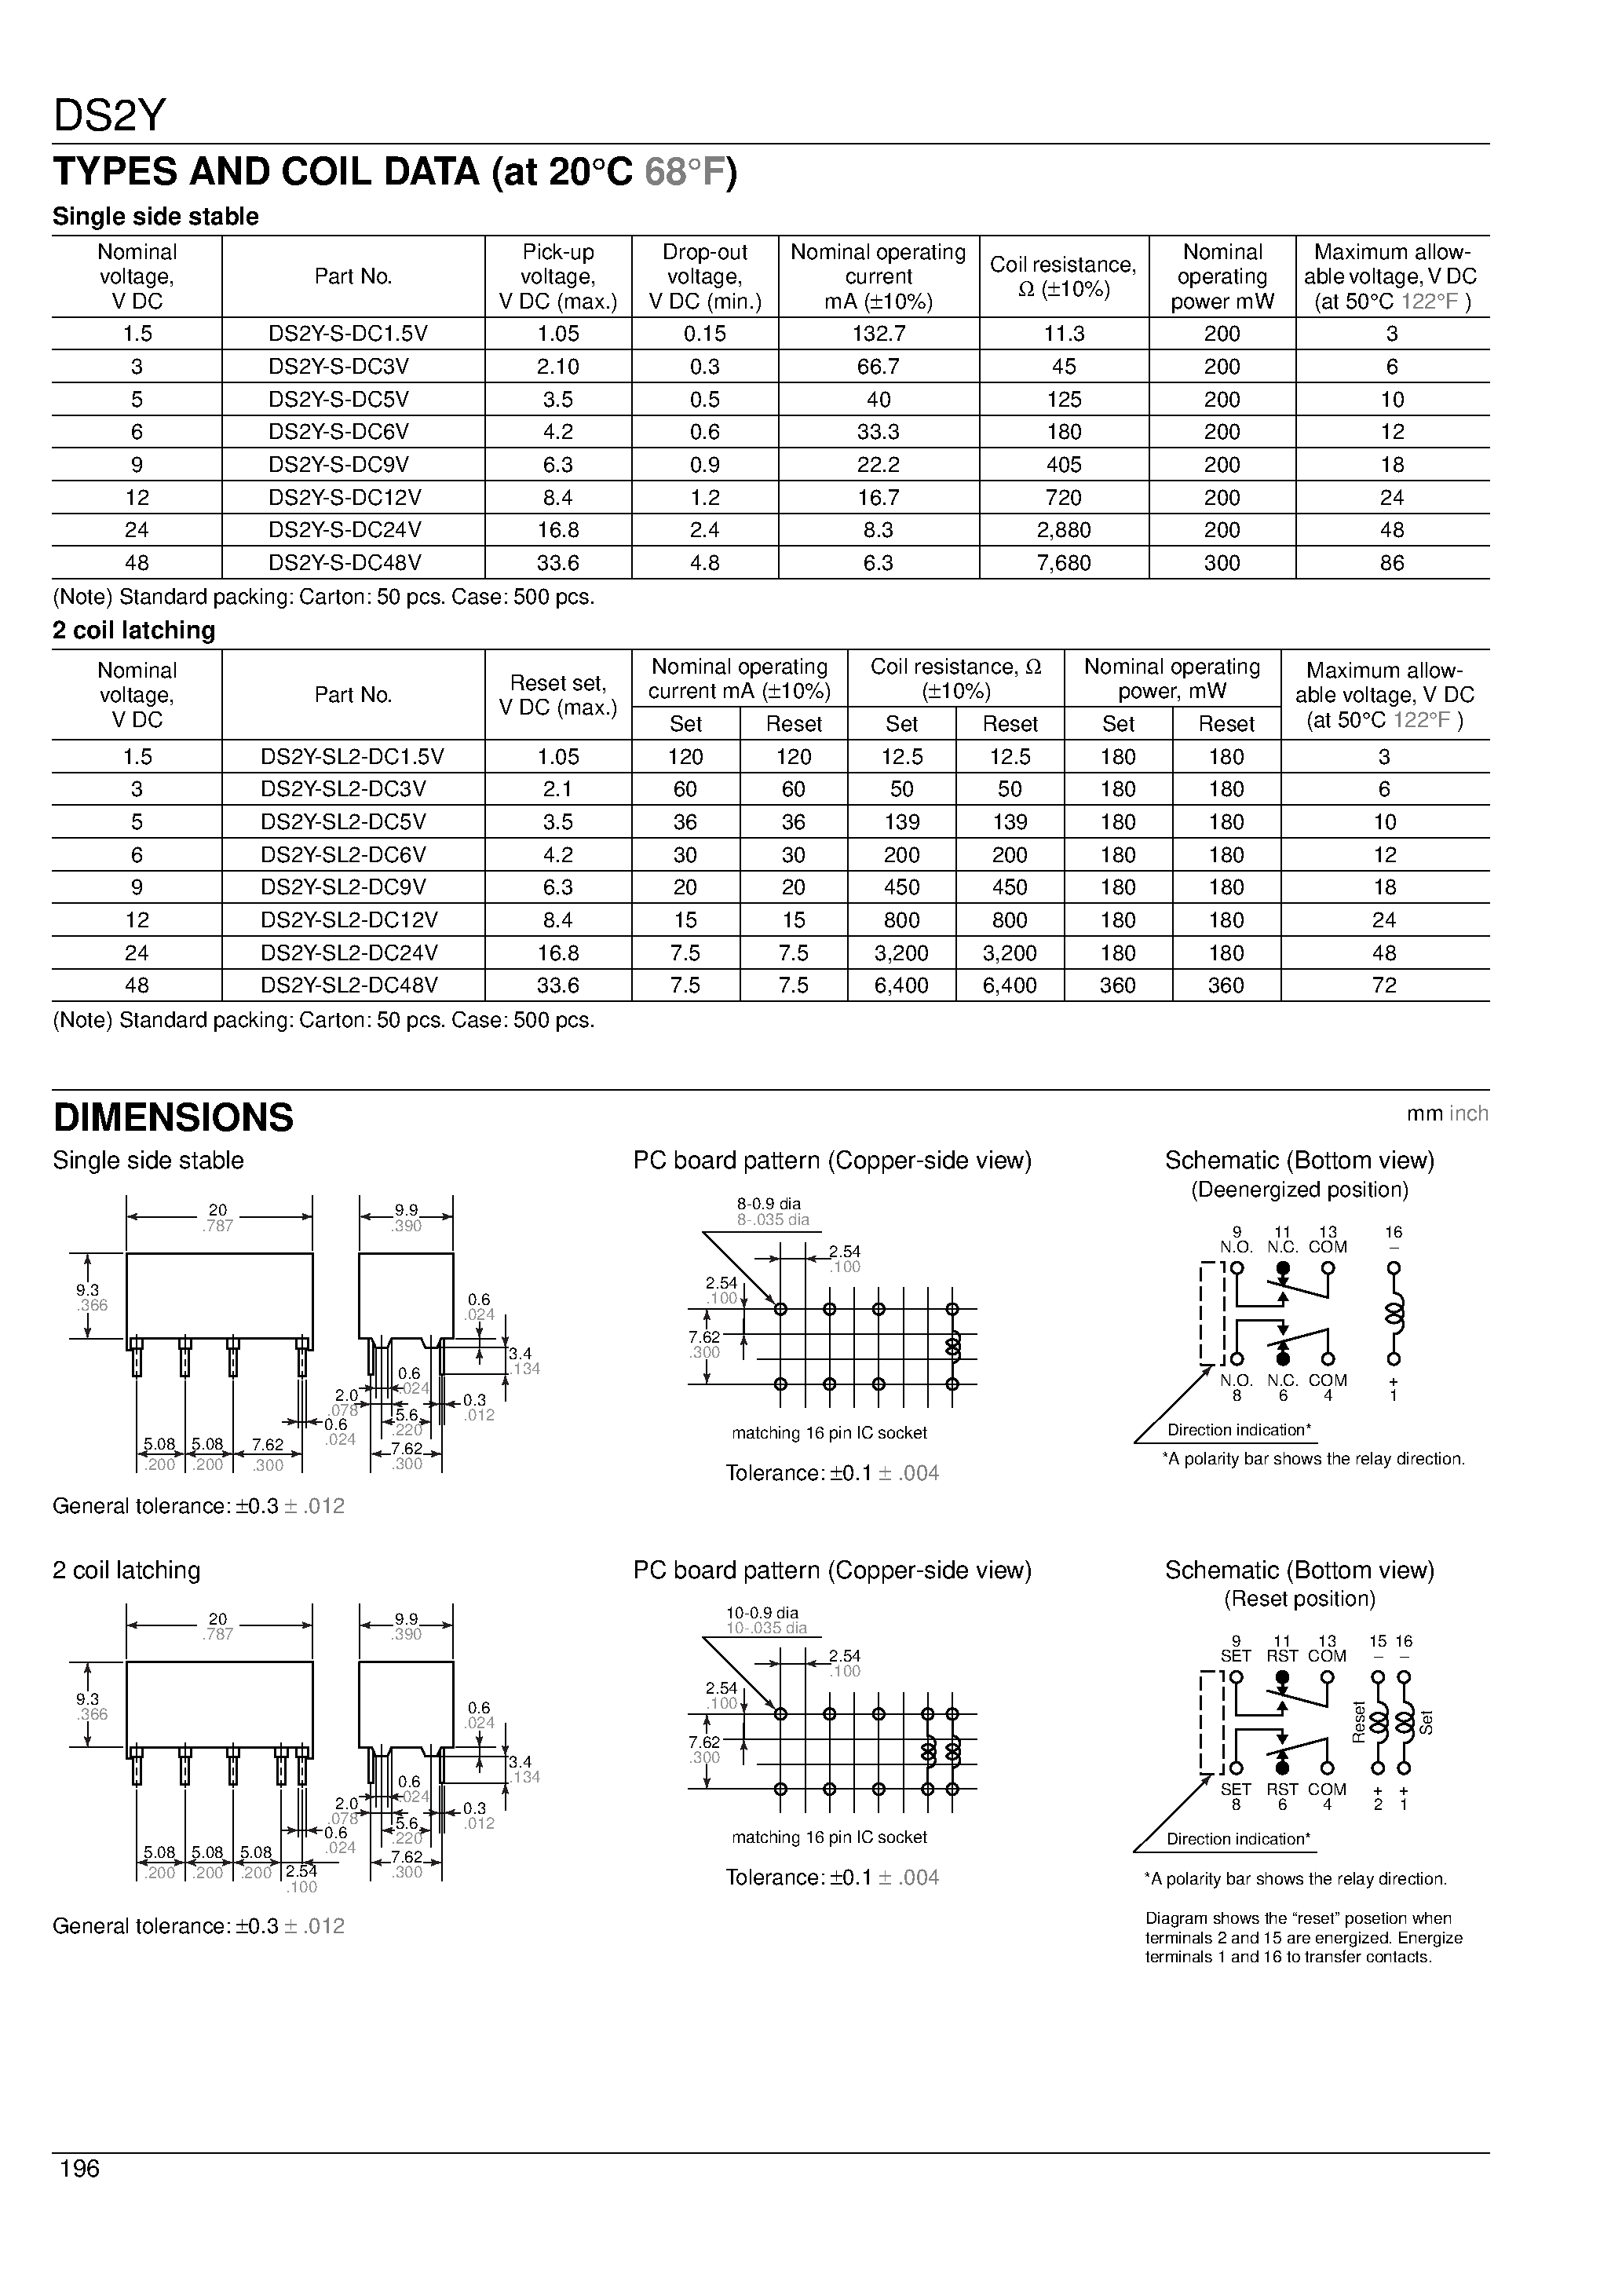 Datasheet DS2Y-SL2-DC48V - 2 Form C contact High sensitivity-200 mW nominal operating power page 2